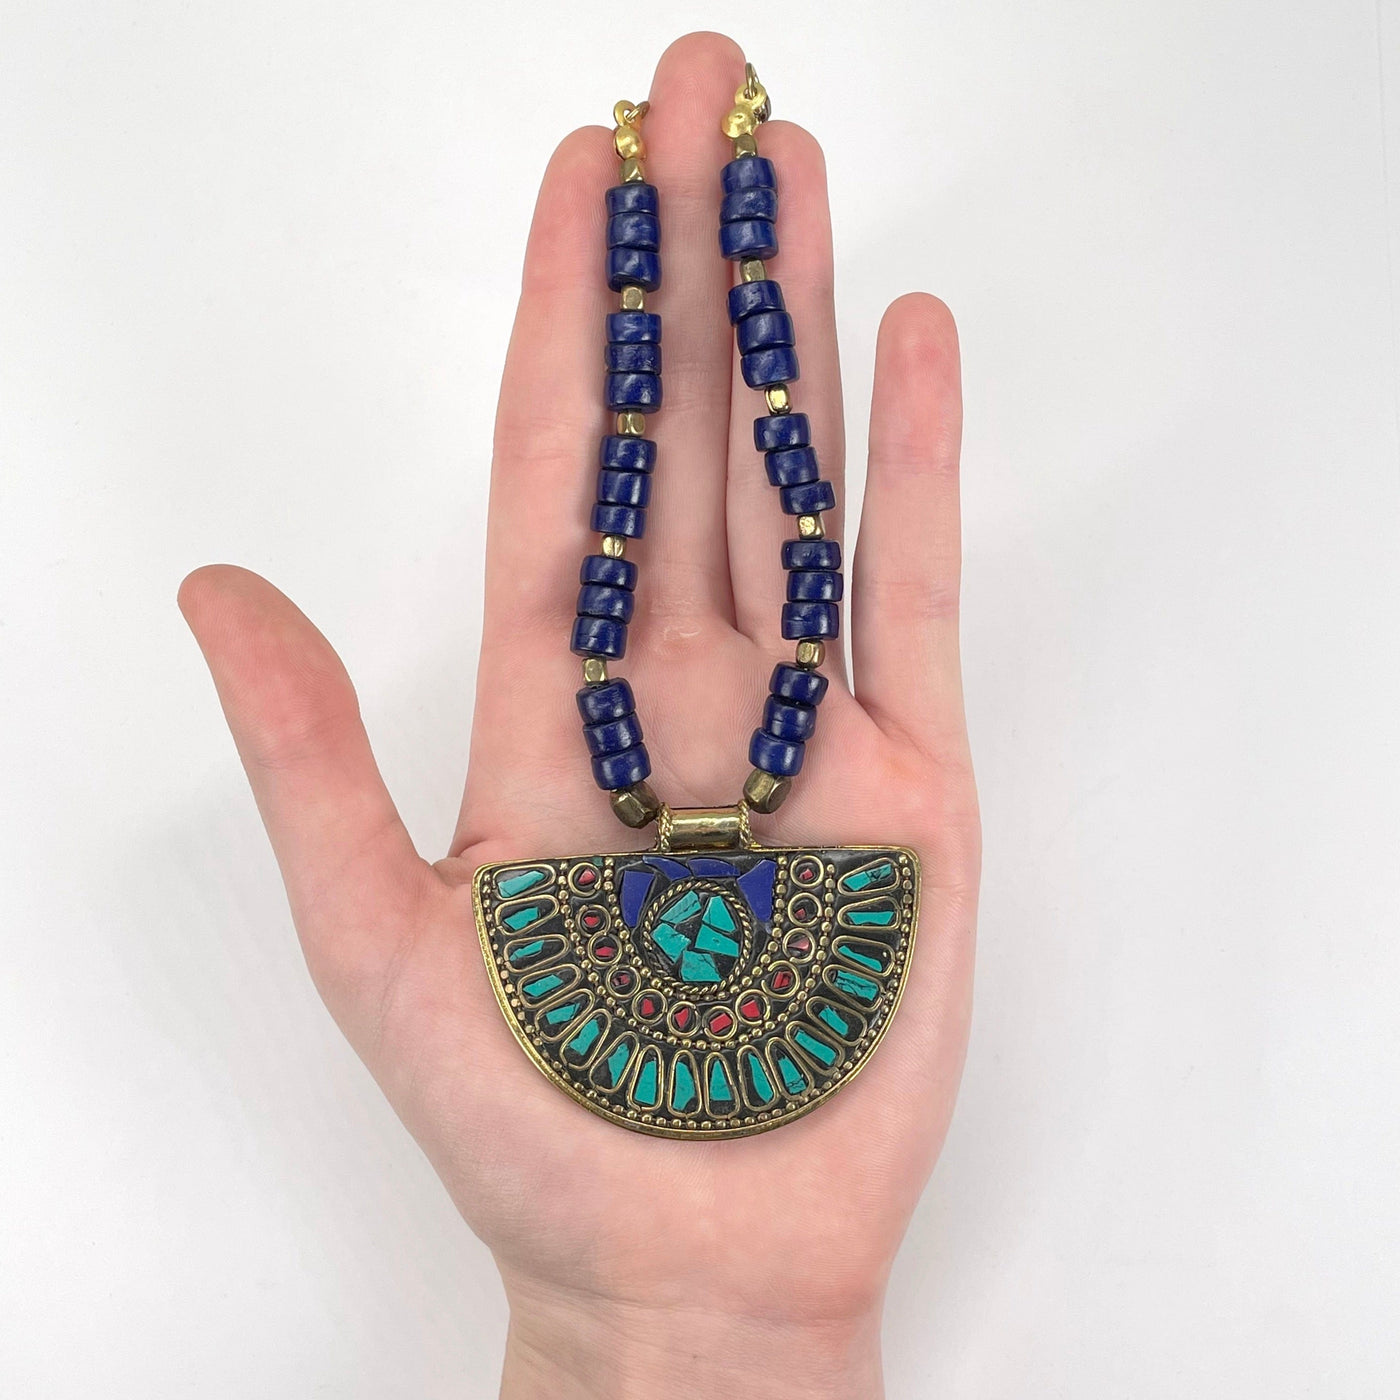 pendant and beaded portion of the necklace in hand for size reference